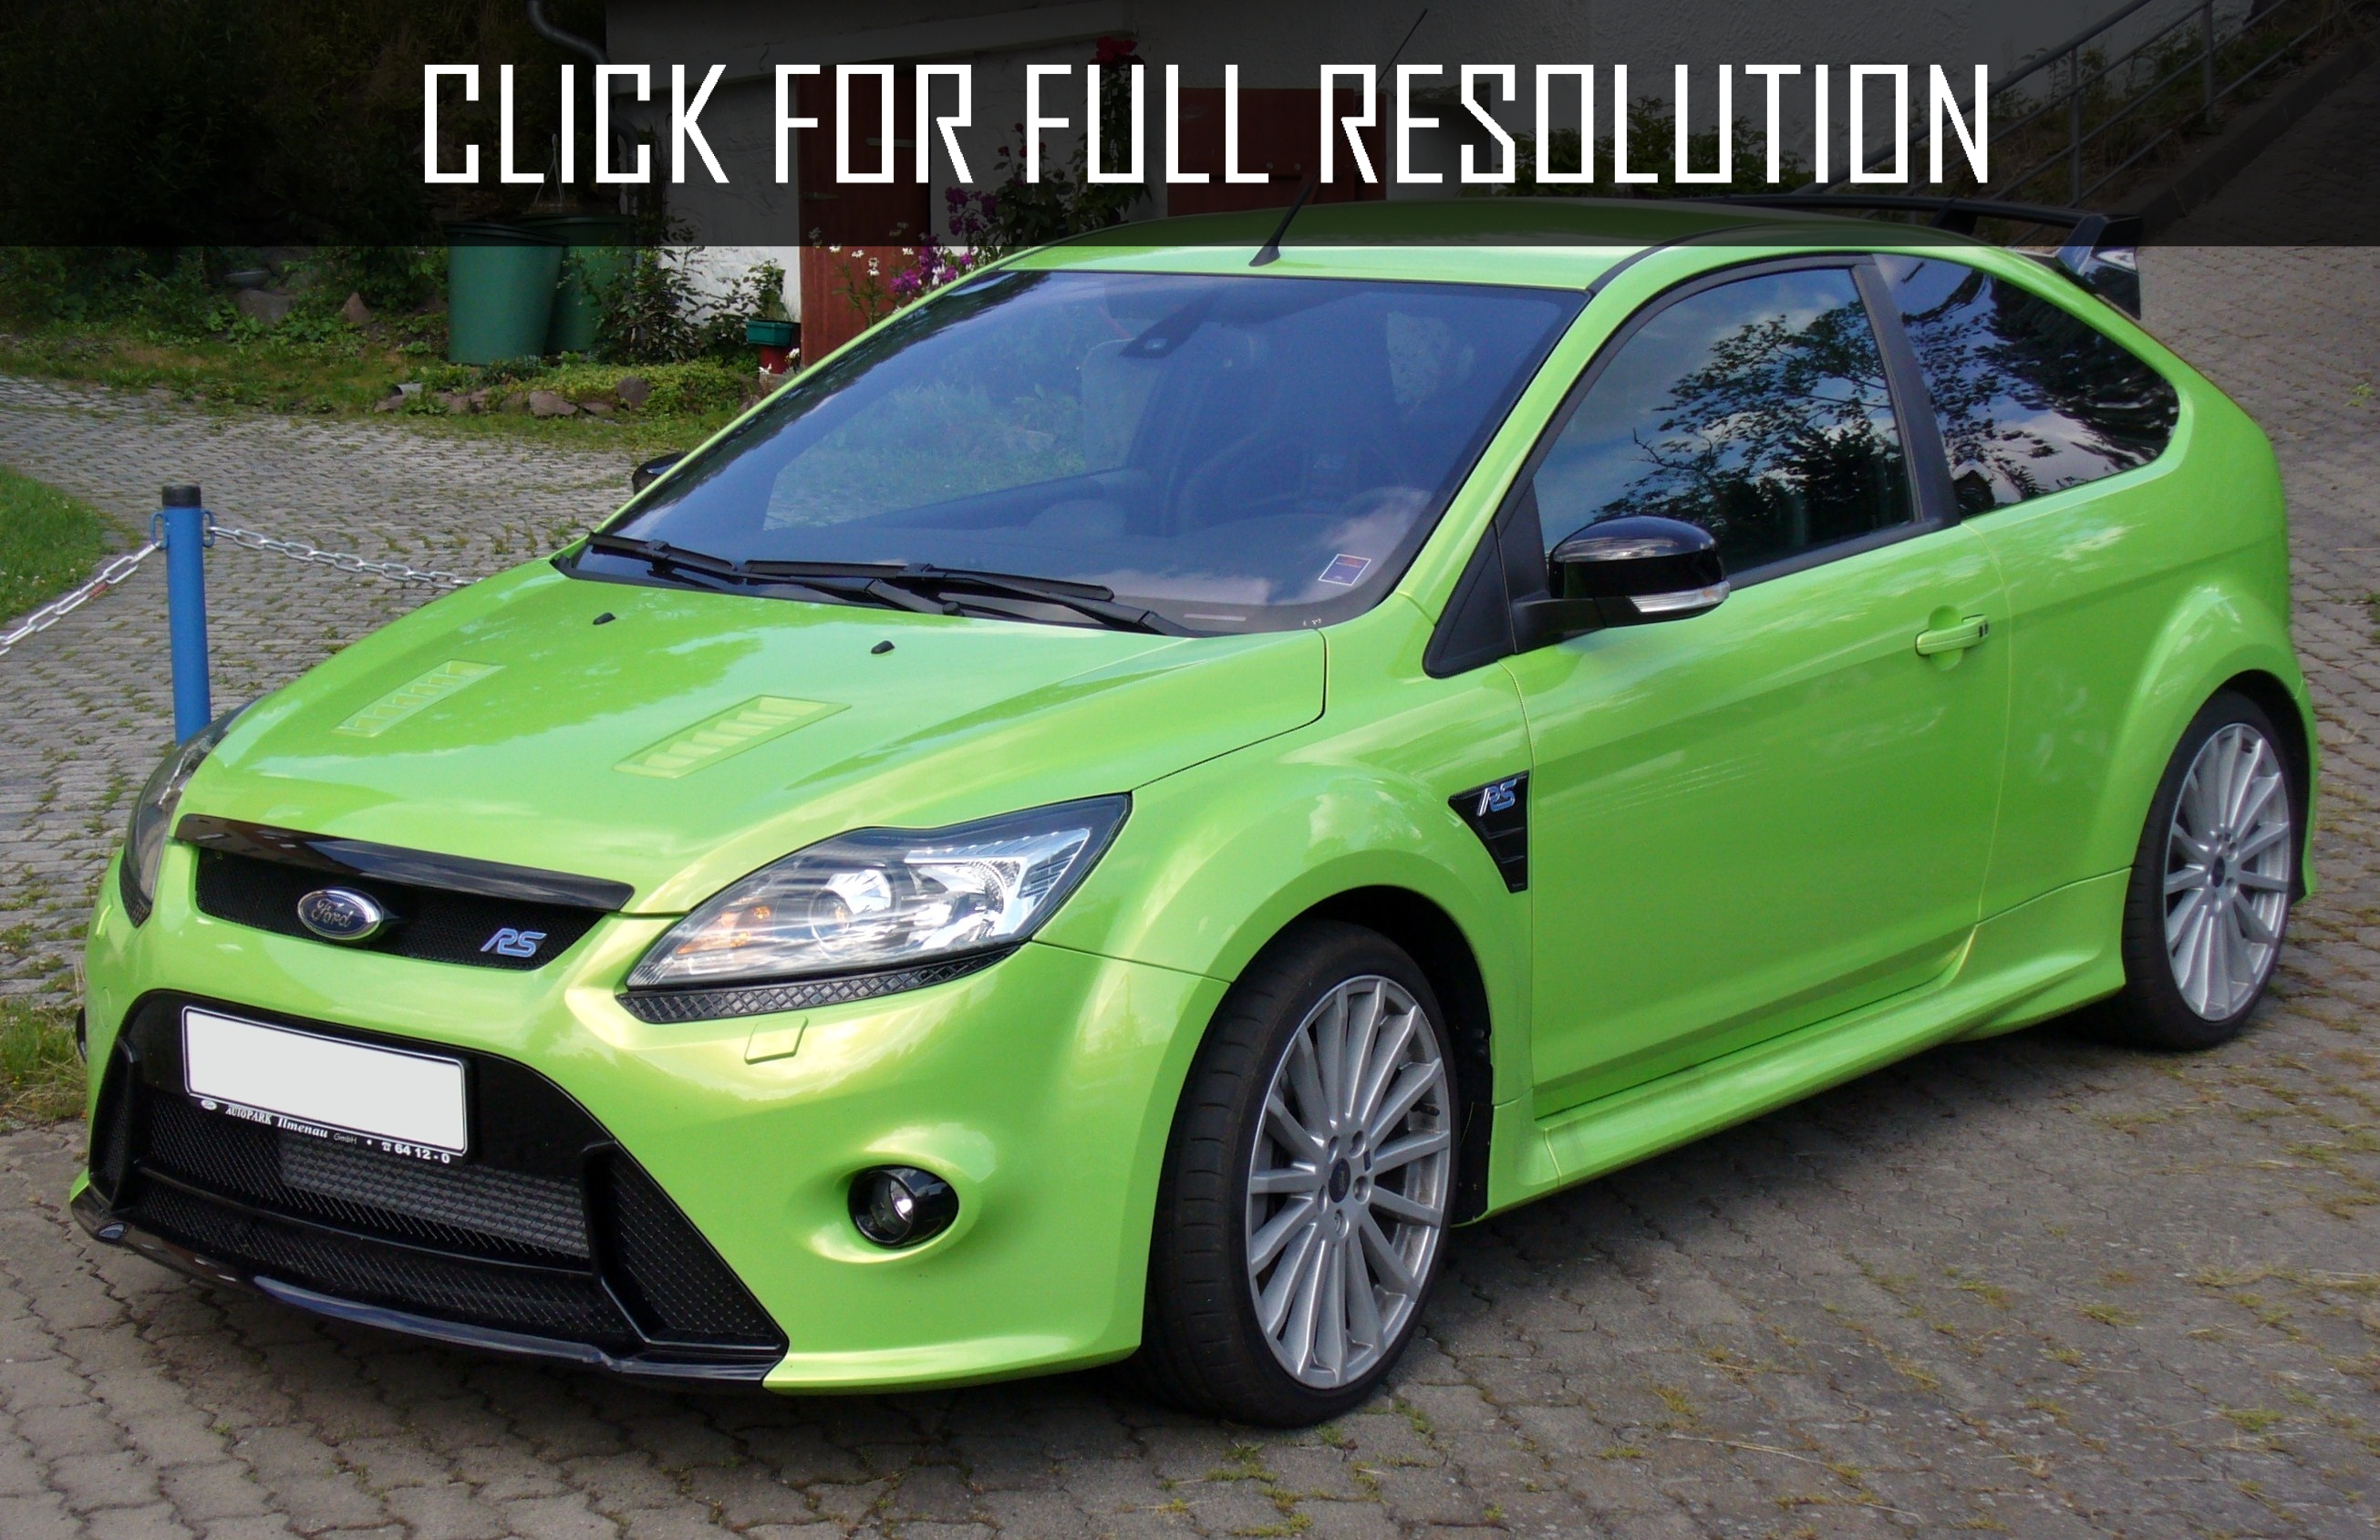 2006 Ford Focus Rs - news, reviews, msrp, ratings with amazing images